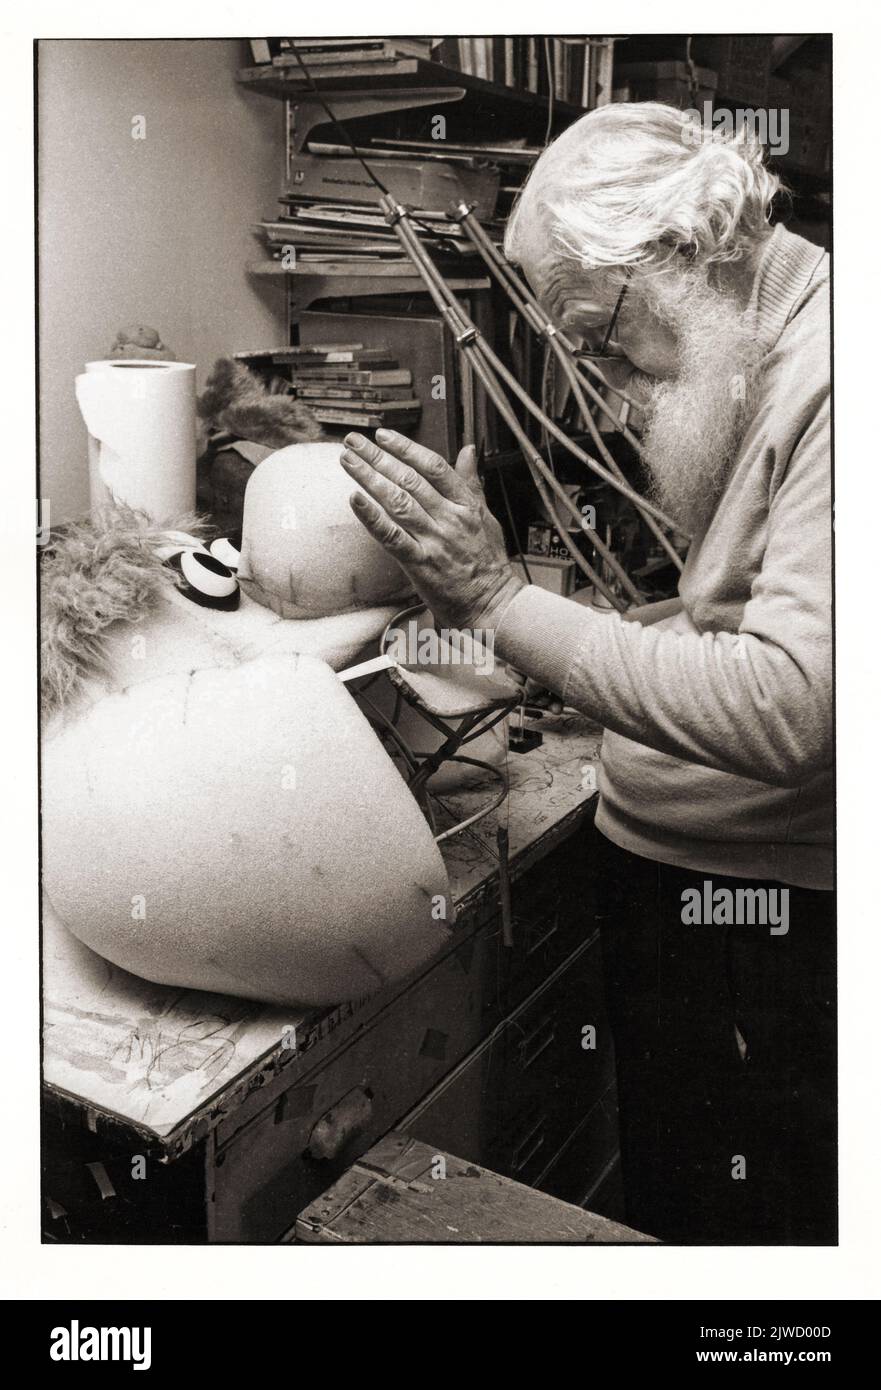 Legendary puppet builder, Kermit Love works on the head of a puppet for a foreign country's version of Sesame Street. 1978 in Greenwich Village, Manhattan, on Great Jones Street. Stock Photo